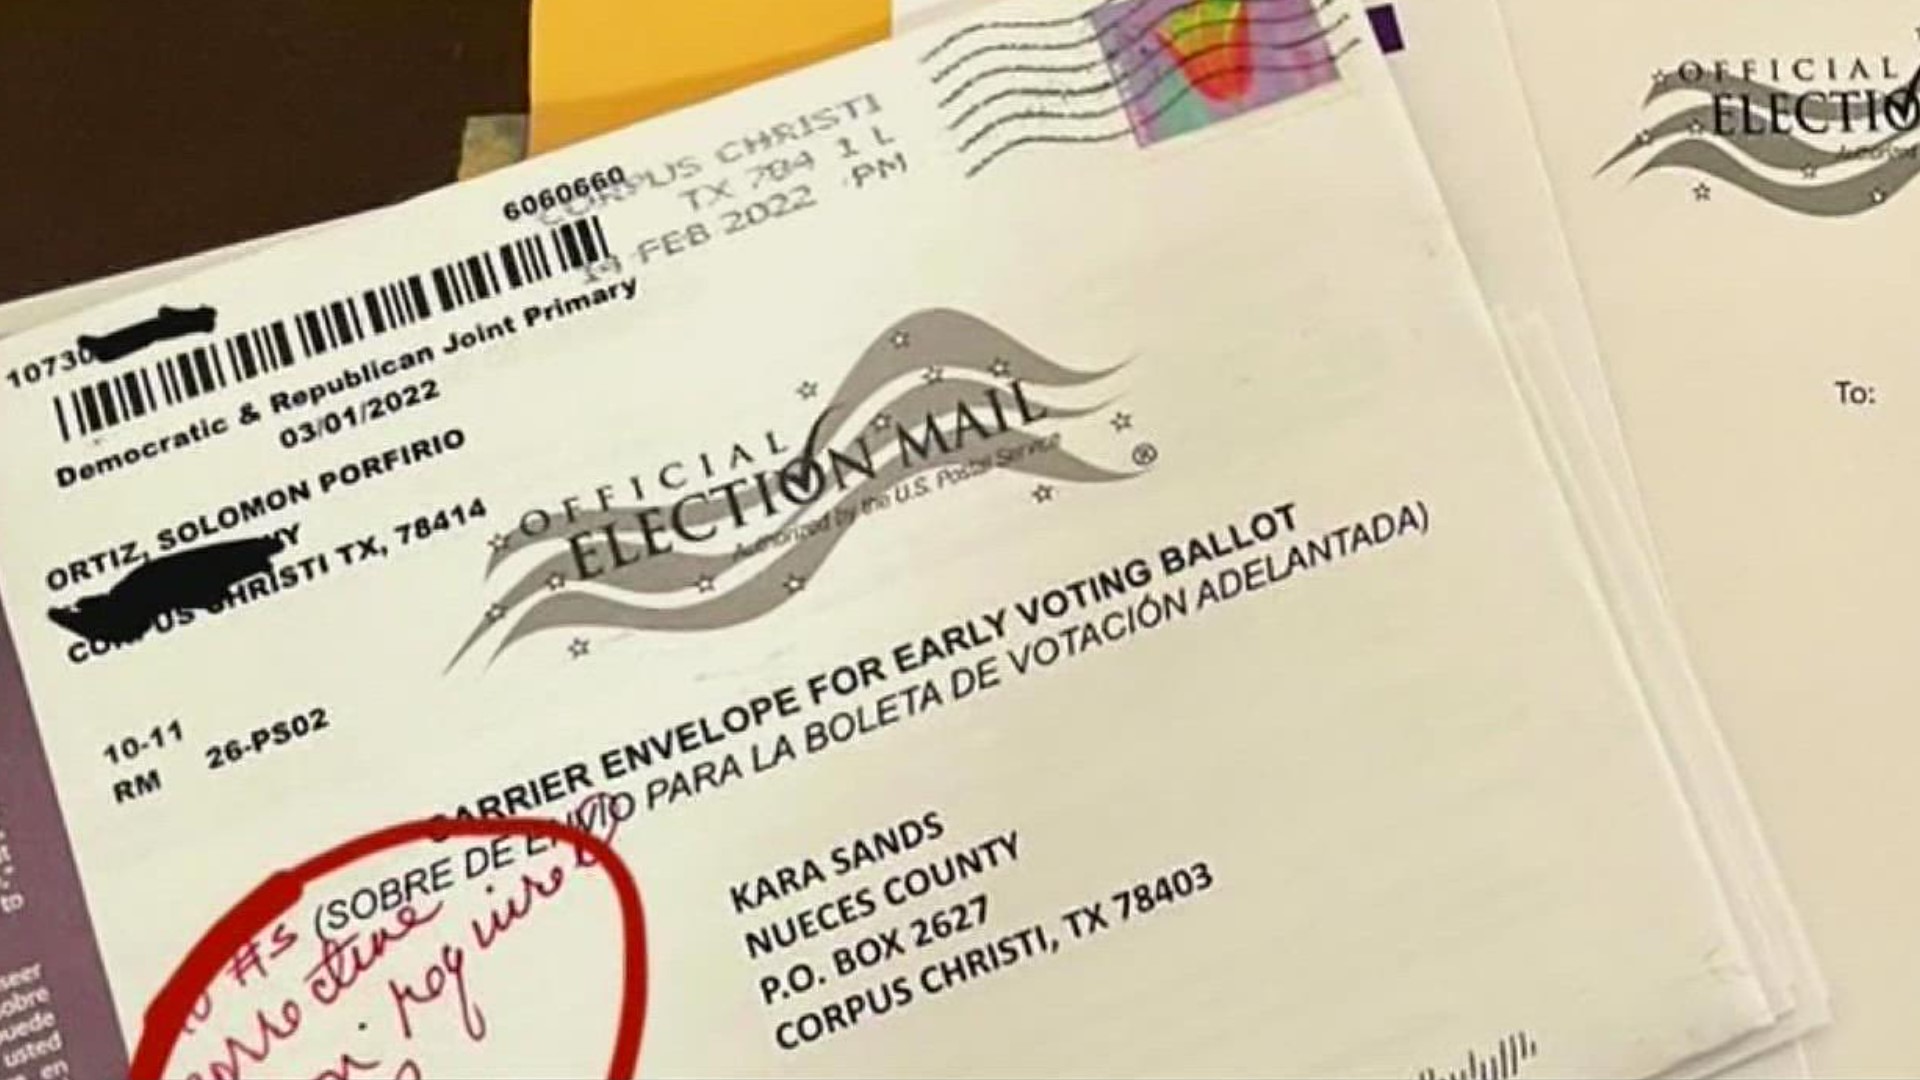 Former U.S Representative Solomon P Ortiz didn't receive his mail-in ballot back until the last day of early voting.